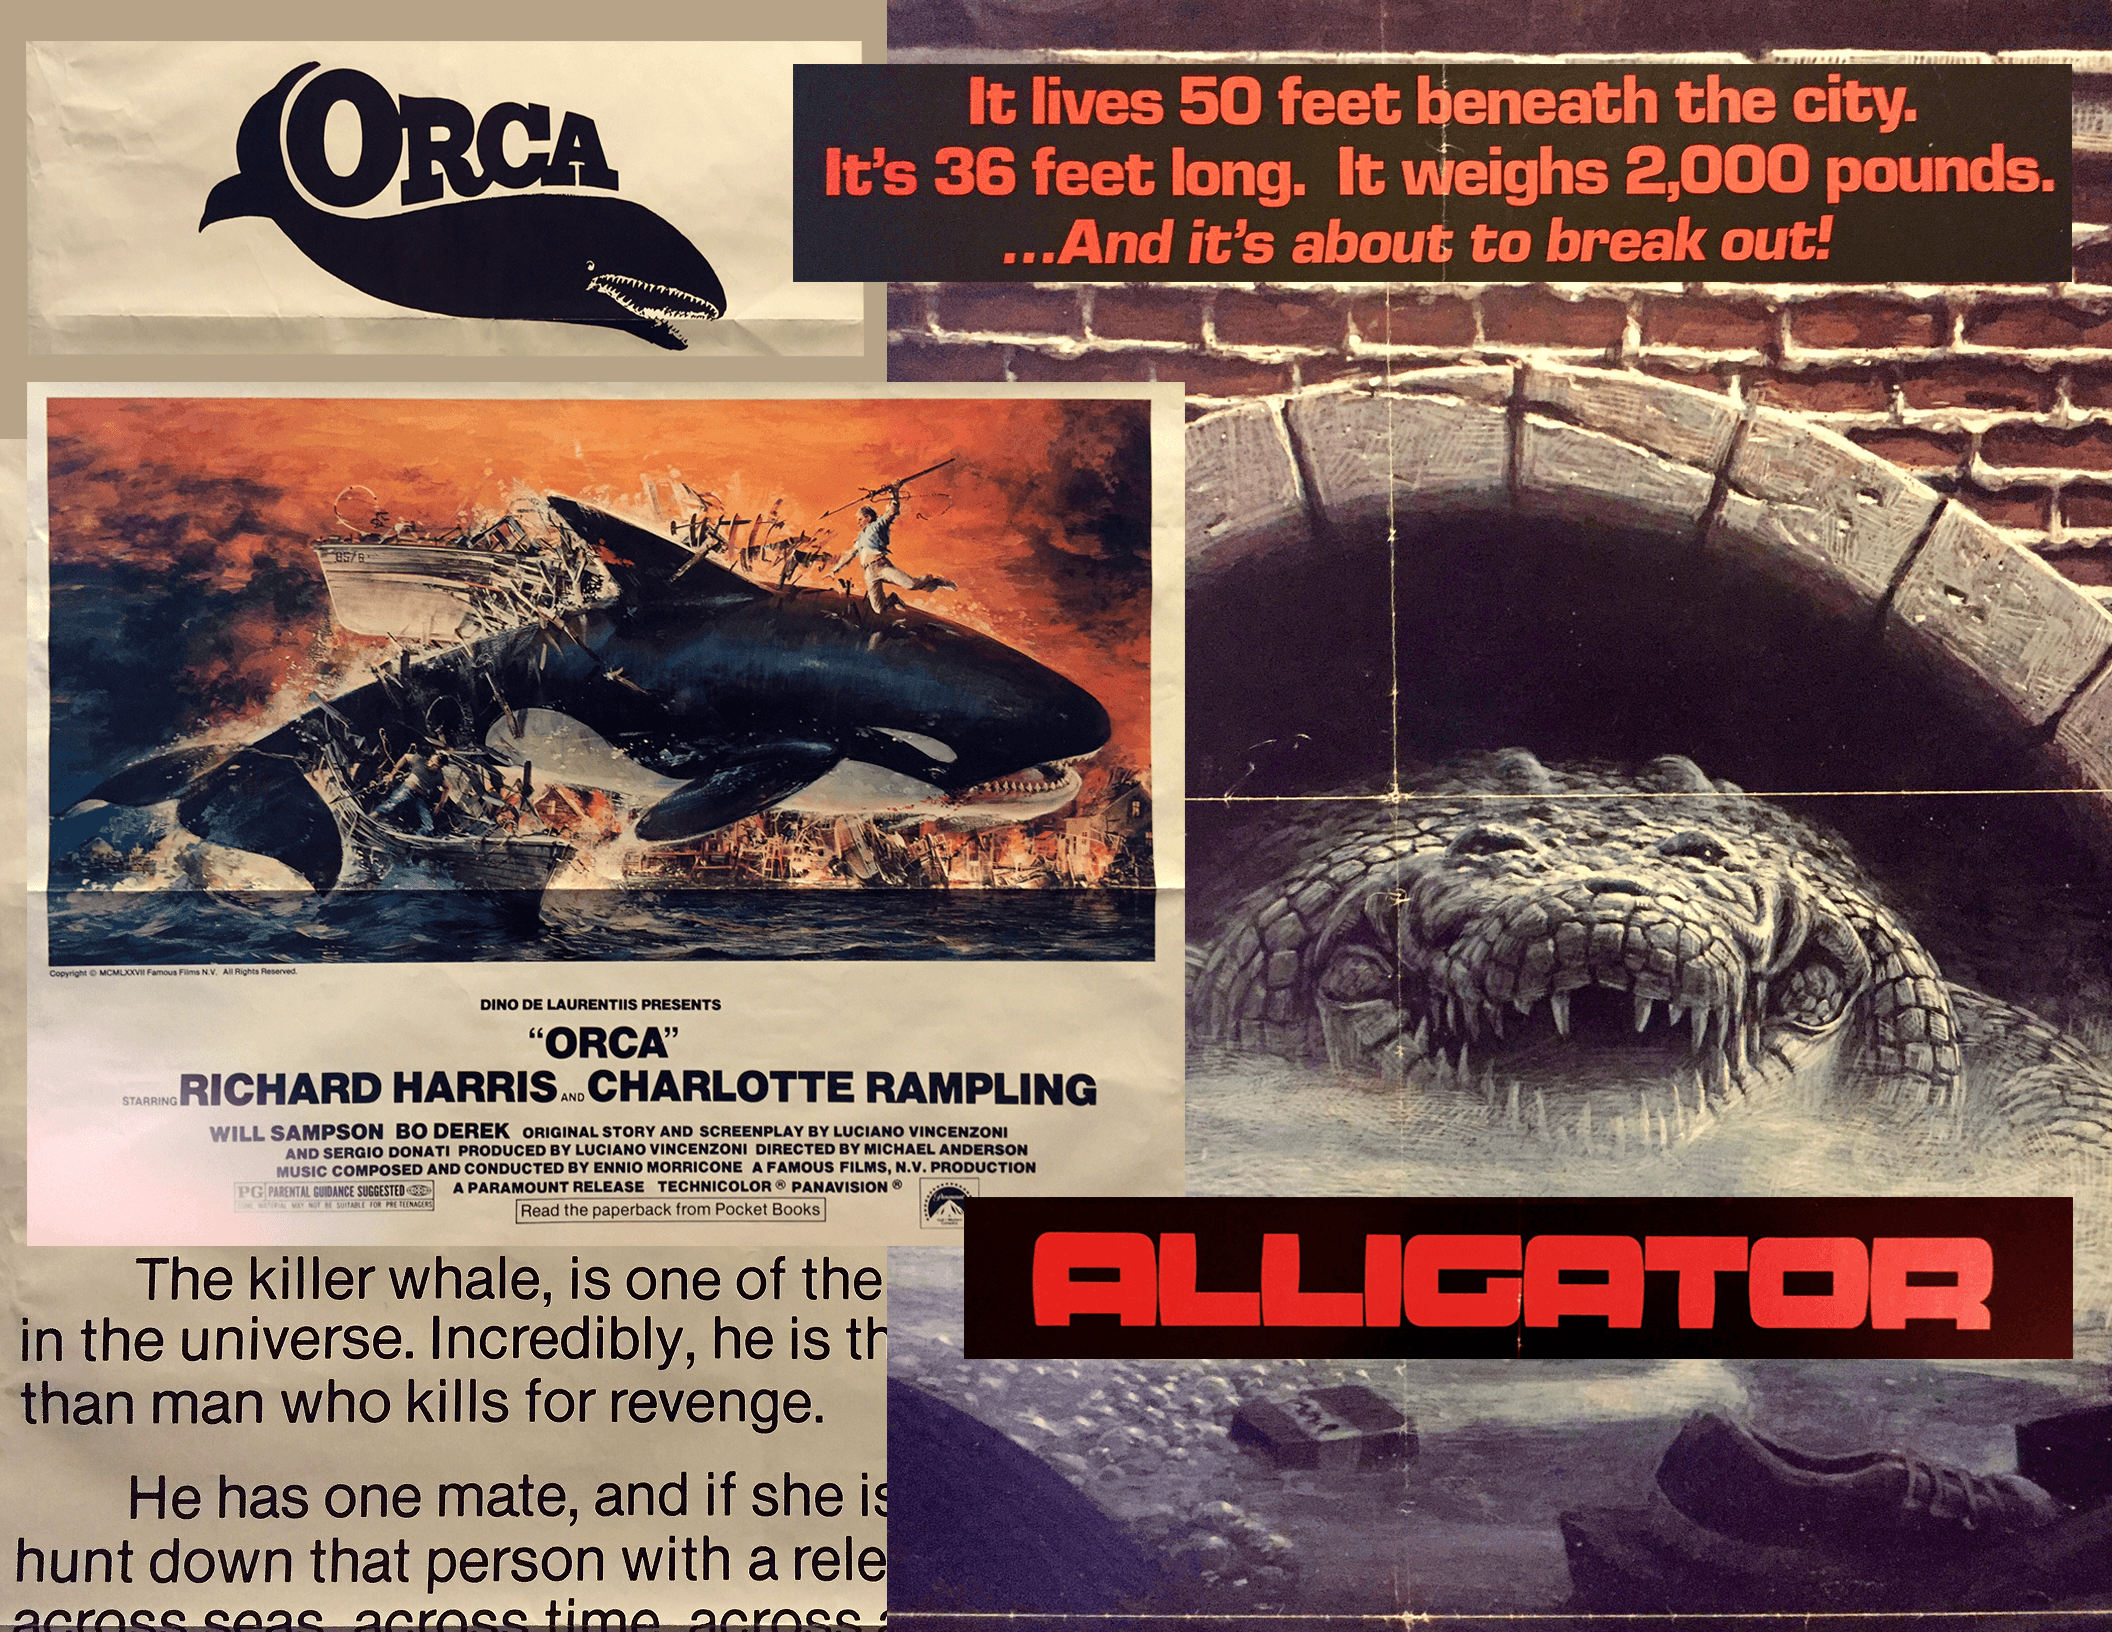 Orca Movie Logo - Cinema Collectibles : Orca and Alligator Posters